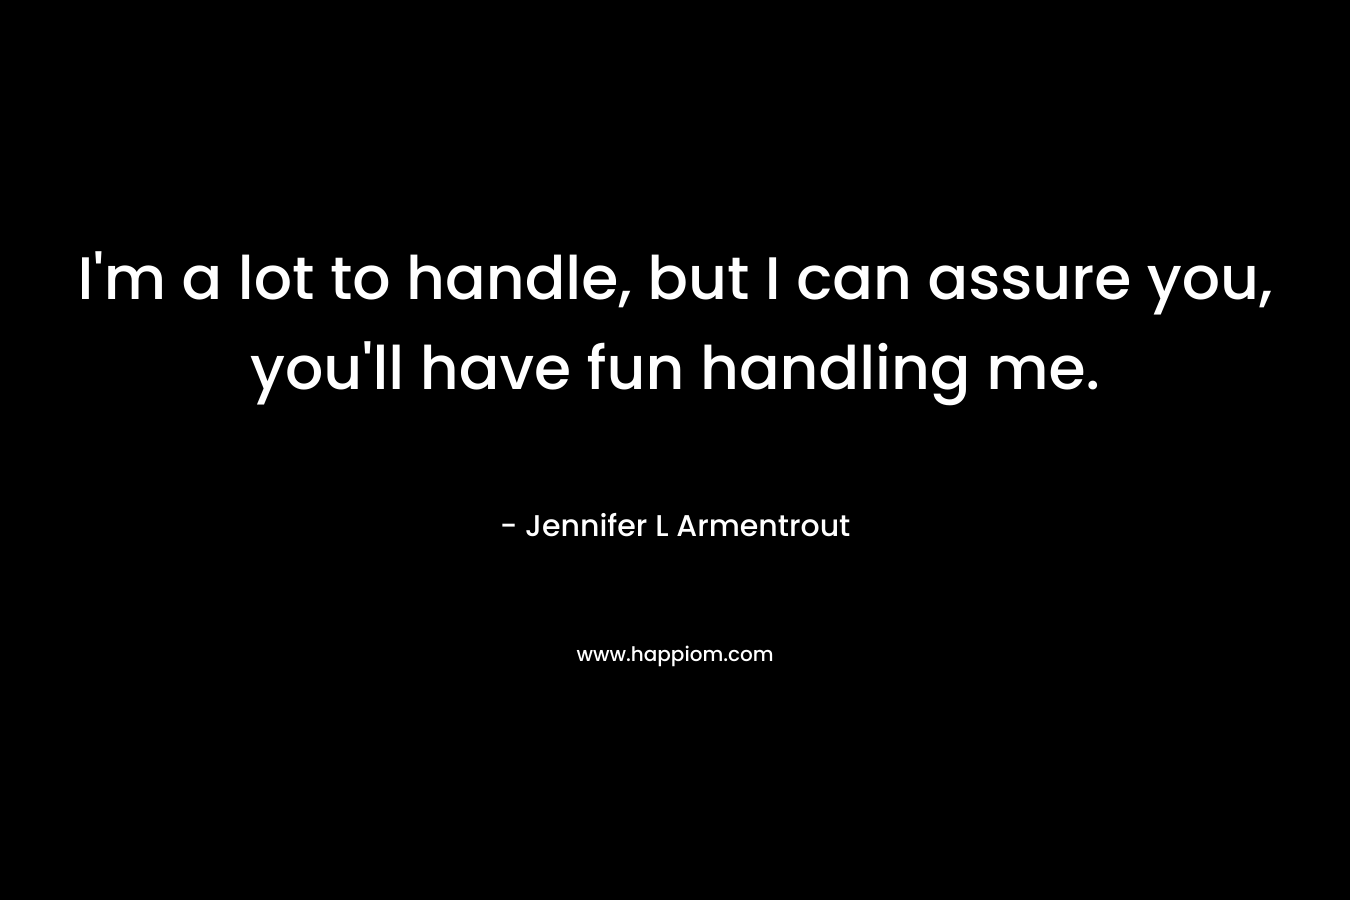 I’m a lot to handle, but I can assure you, you’ll have fun handling me. – Jennifer L Armentrout